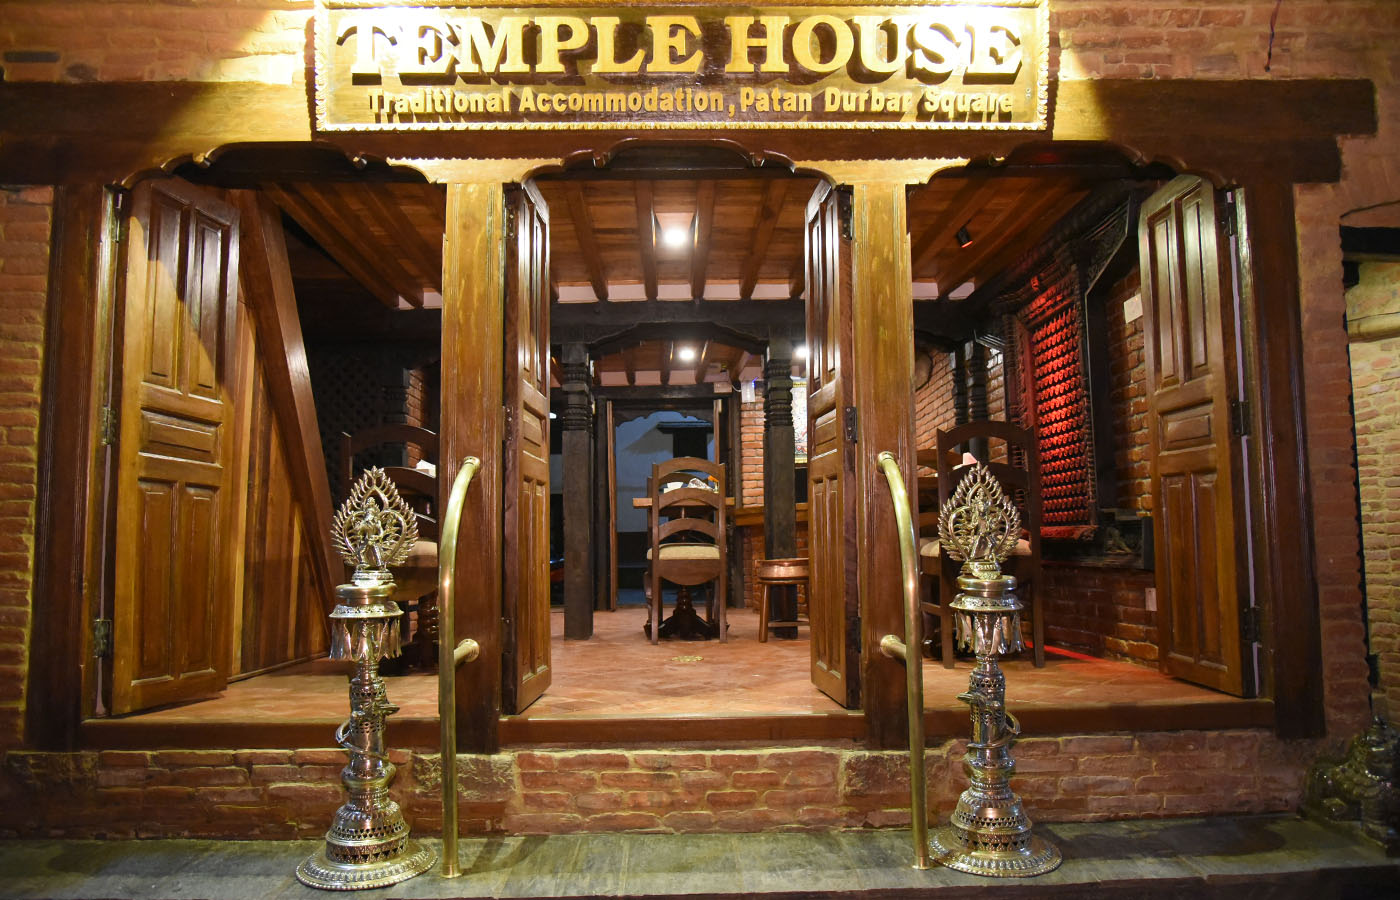 Welcome to Temple House